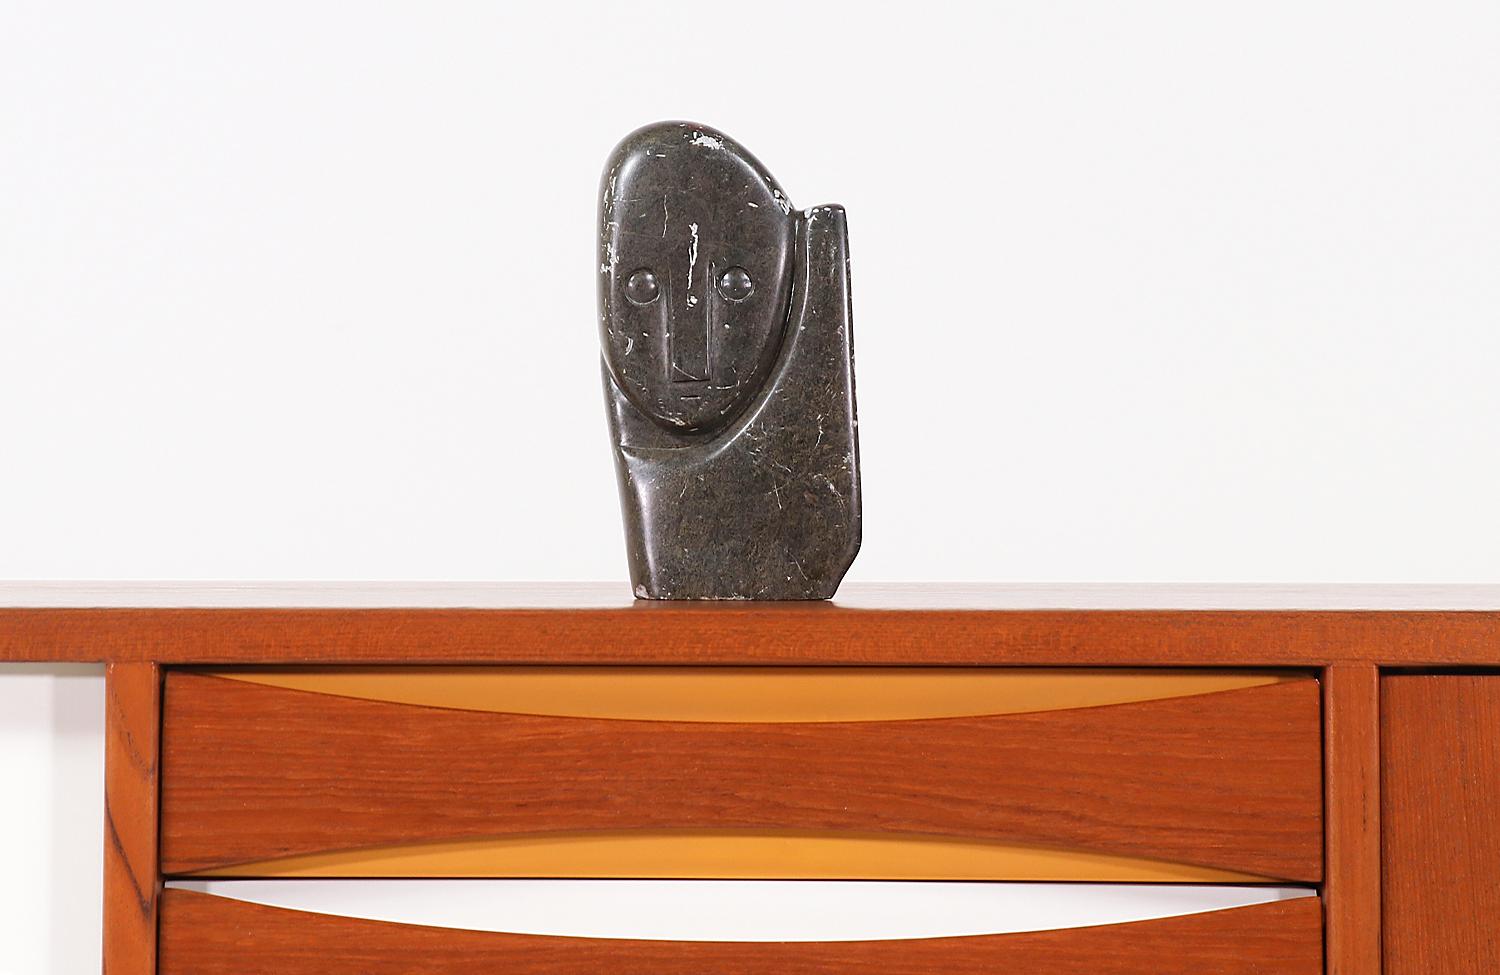 Fascinating Mid-Century Modern carved stone cubist sculpture designed and manufactured in the United States, circa 1970s. This fascinating cubist face sculpture features an expertly carved patinated stone body with clear lines and showing wear from